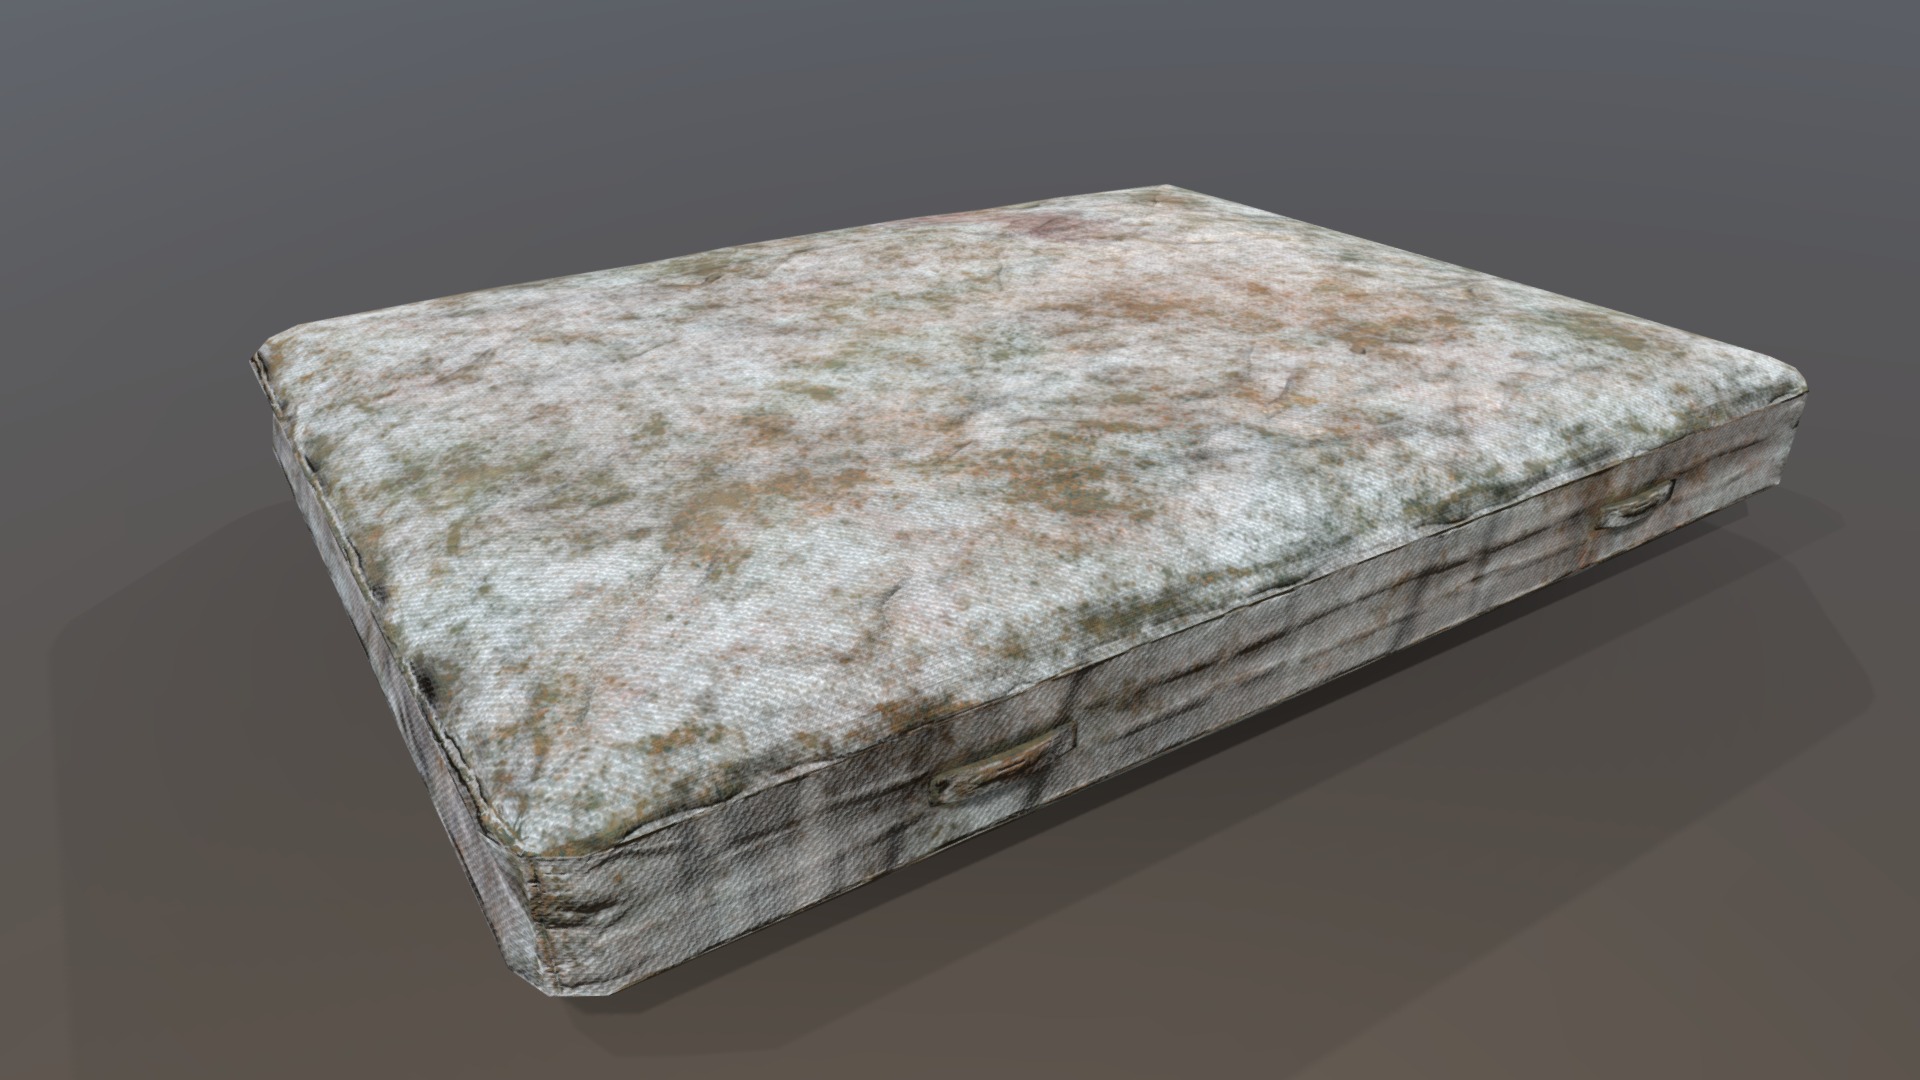 3D model Low Poly dirty Mattress - This is a 3D model of the Low Poly dirty Mattress. The 3D model is about a wooden box with a hole in it.